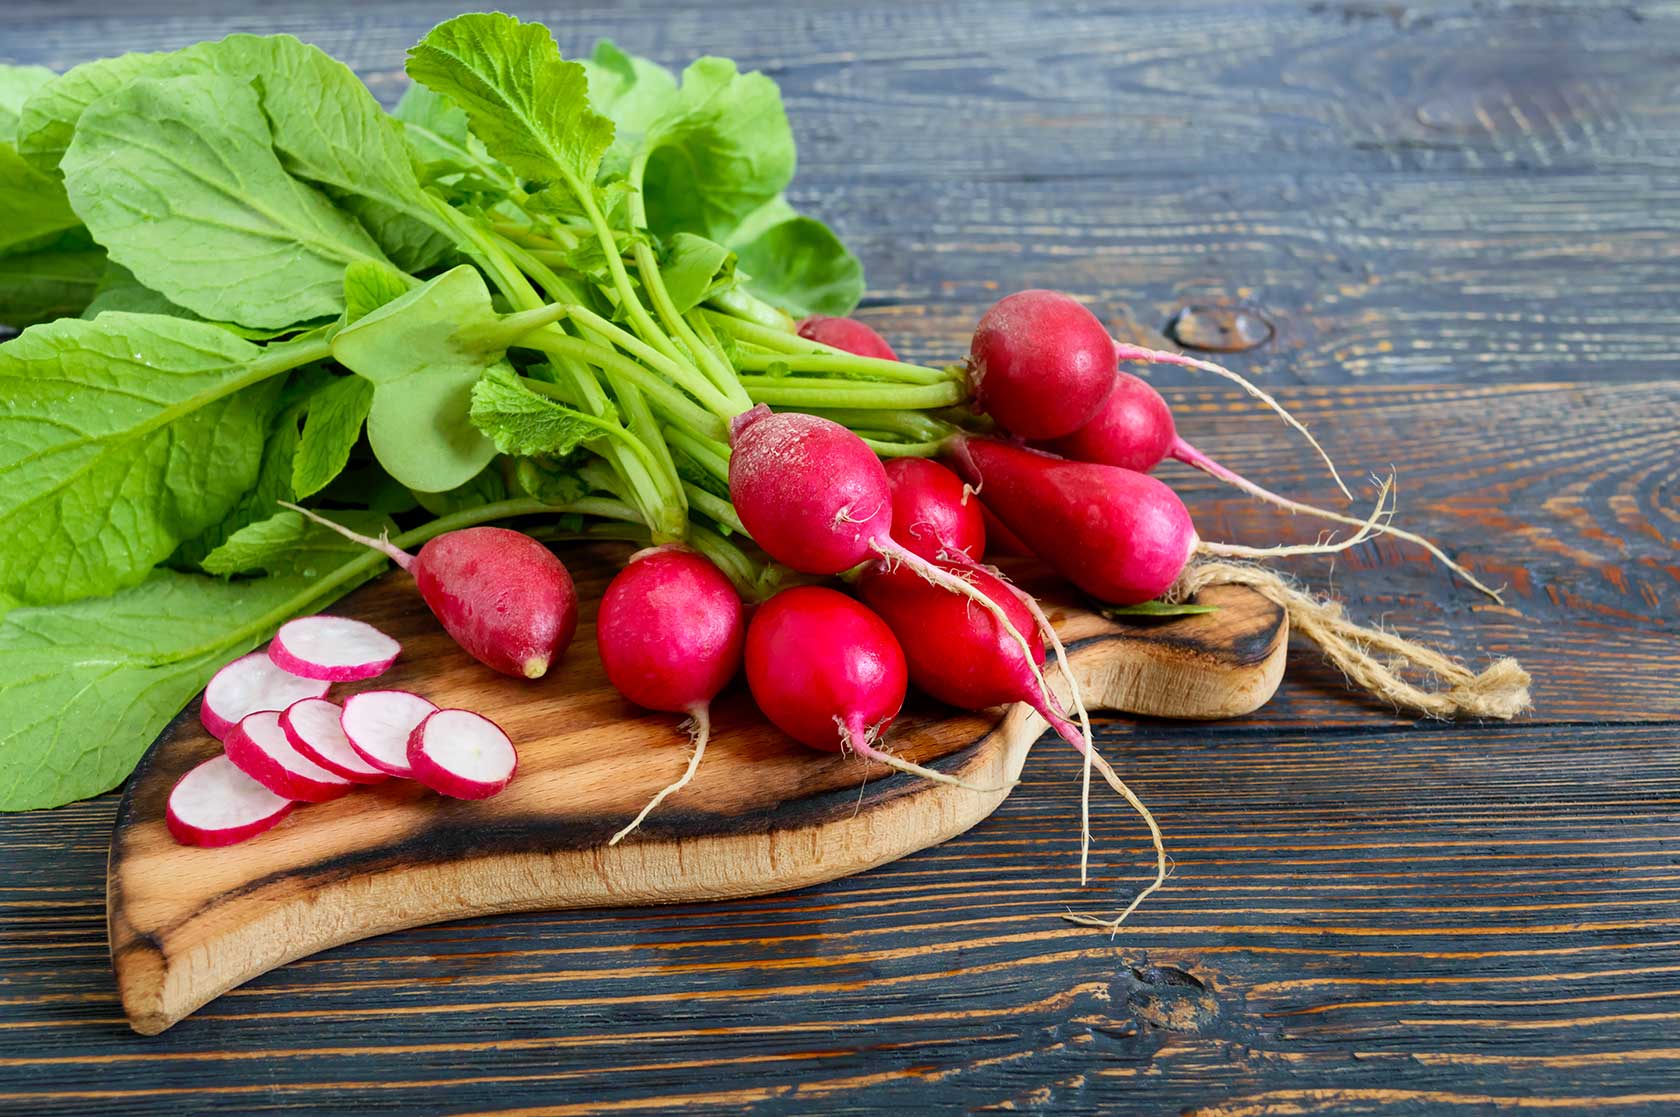 How To Make Radishes Less Spicy